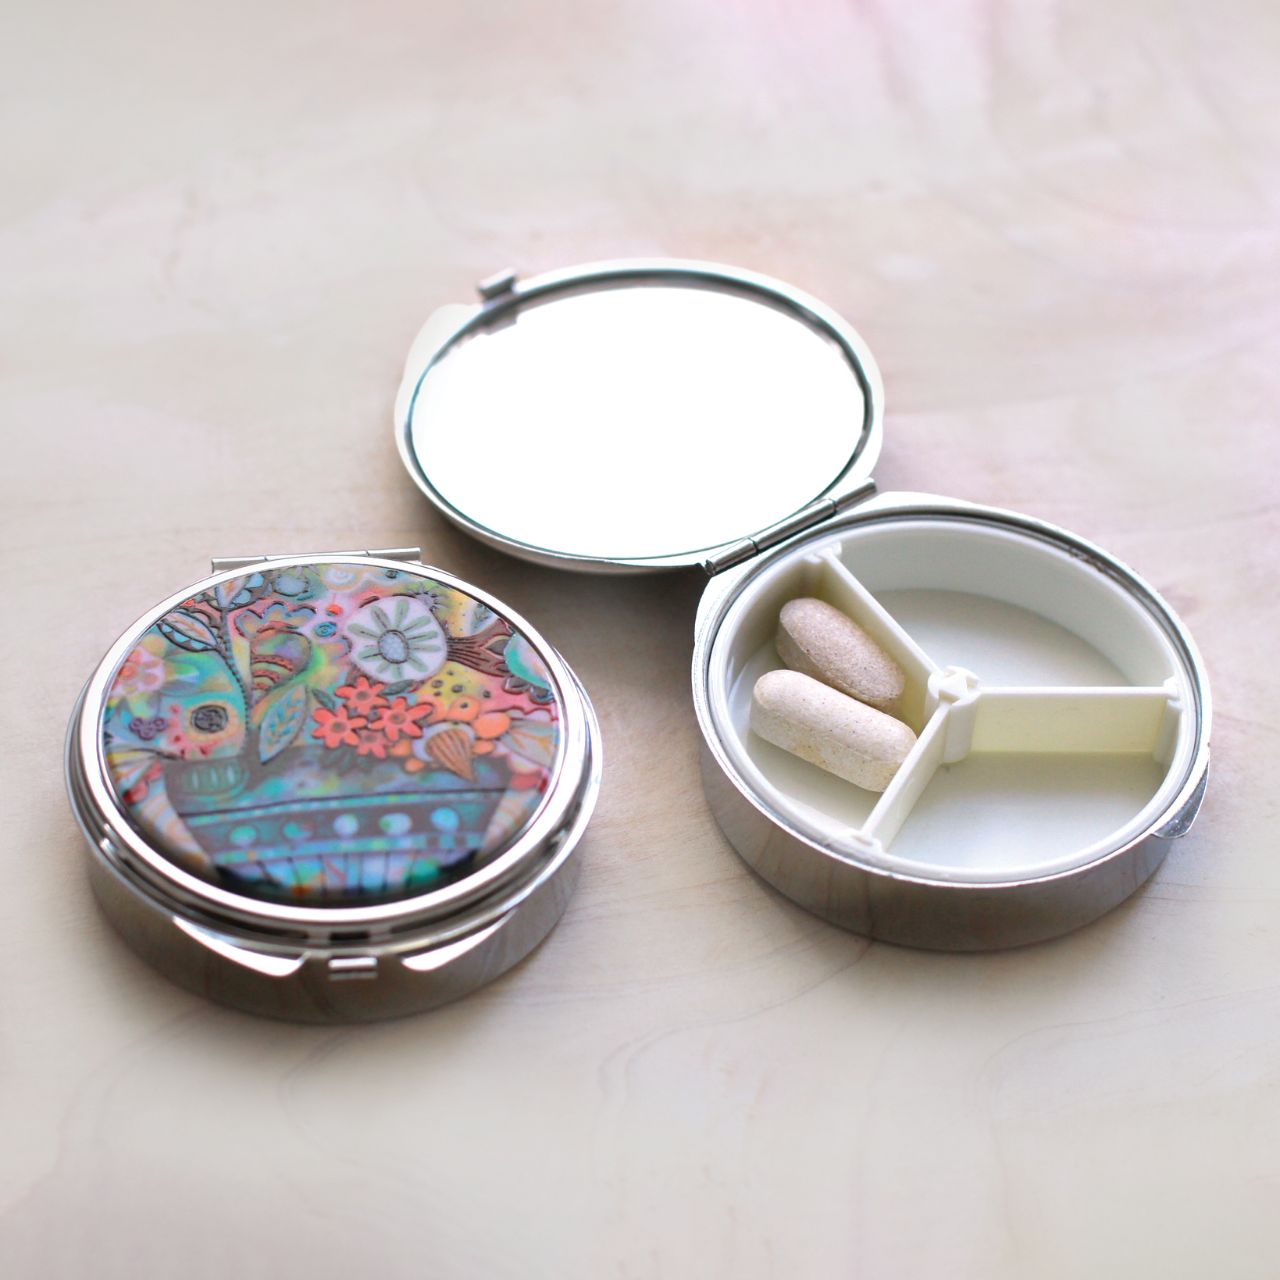 ﻿Michelle Allen Flower Blast Trinket Box  This lightweight and durable Flower blast trinket box makes a splendid gift for a friend or yourself. They are the perfect size to fit in any purse, make-up bag, carry on, or backpack.